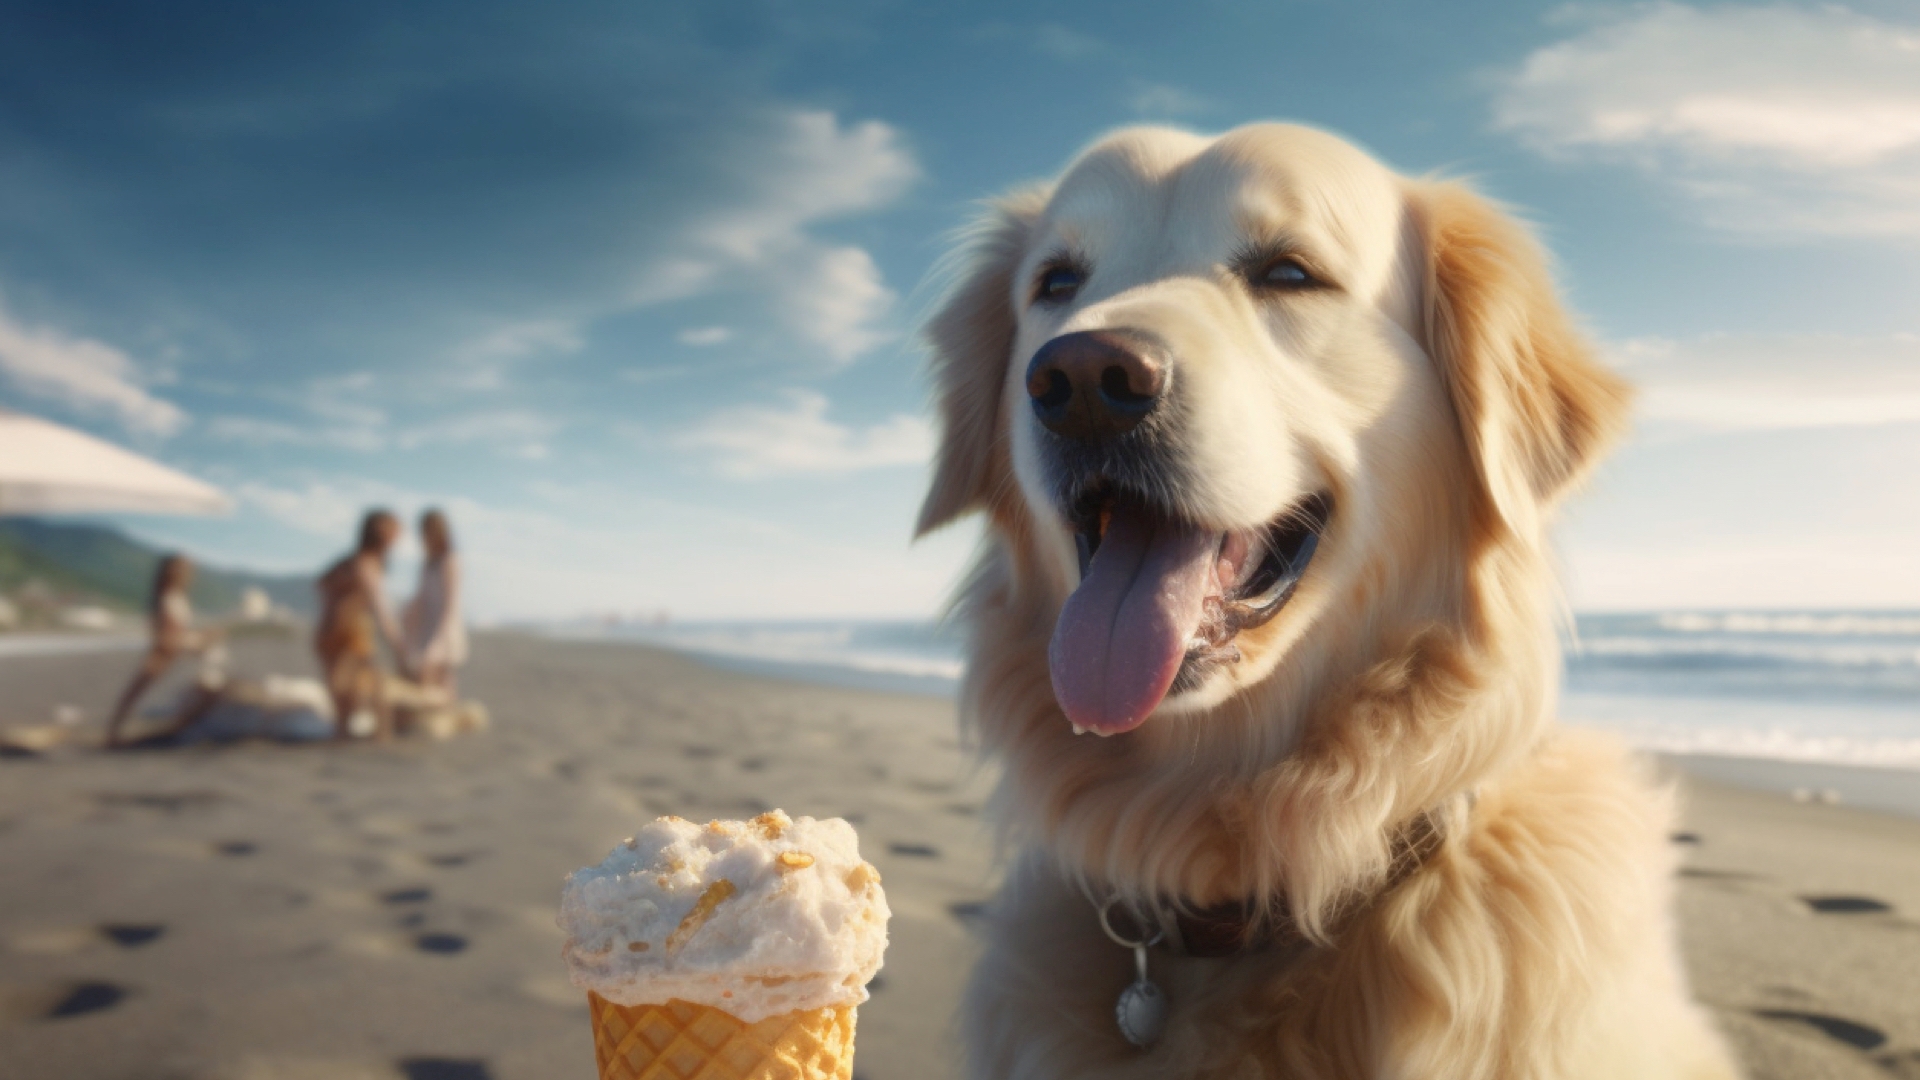 Dog Friendly Beaches, The Best Dog-Friendly Beaches in the United States